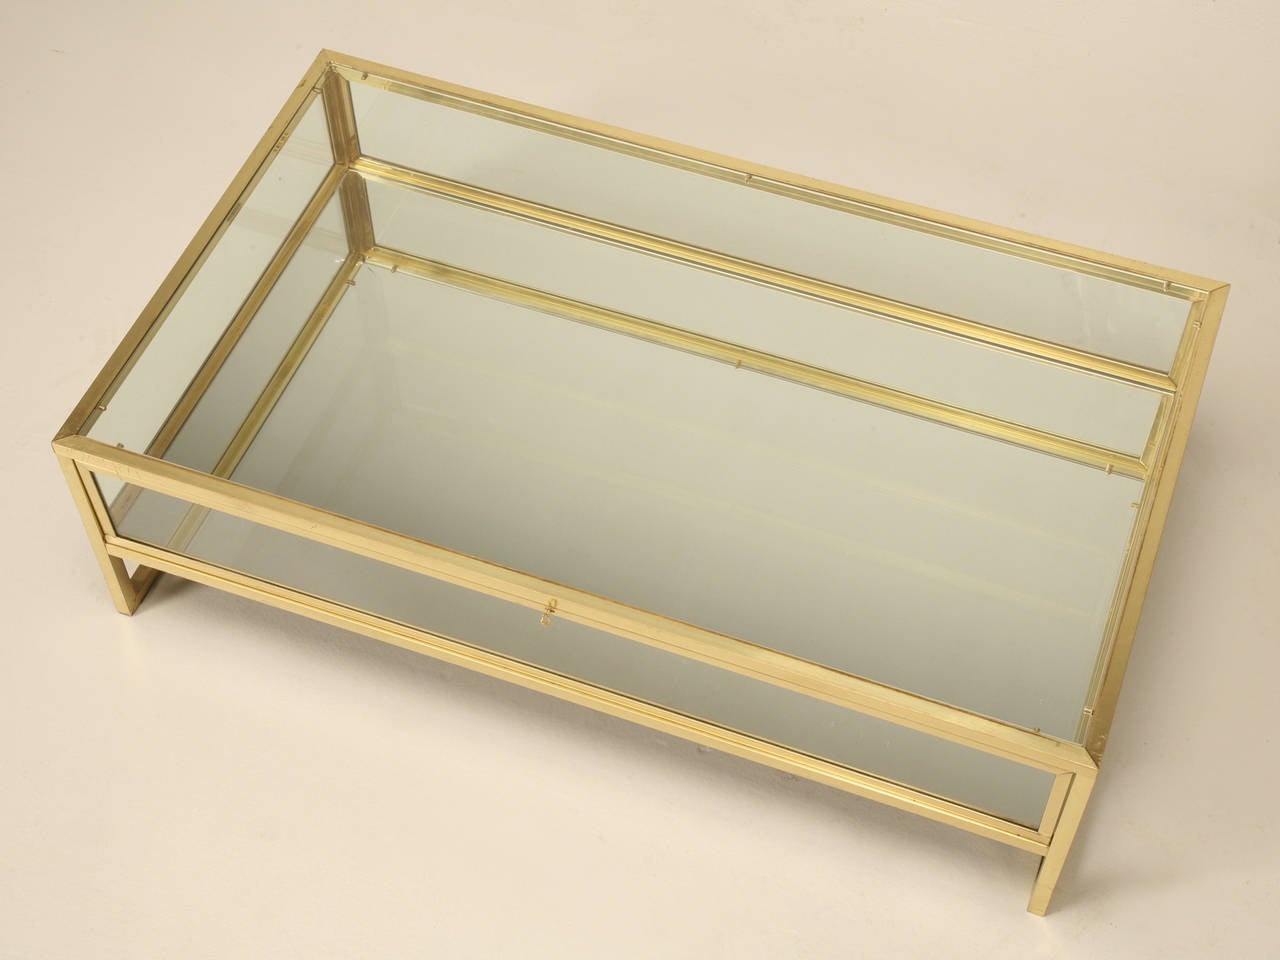 Very unusual, French Mid-Century Modern brass and glass coffee table, that doubles as a display case for your special collections. Could be a lot of fun changing it out for the holidays, or for a special birthday, where one might display photographs